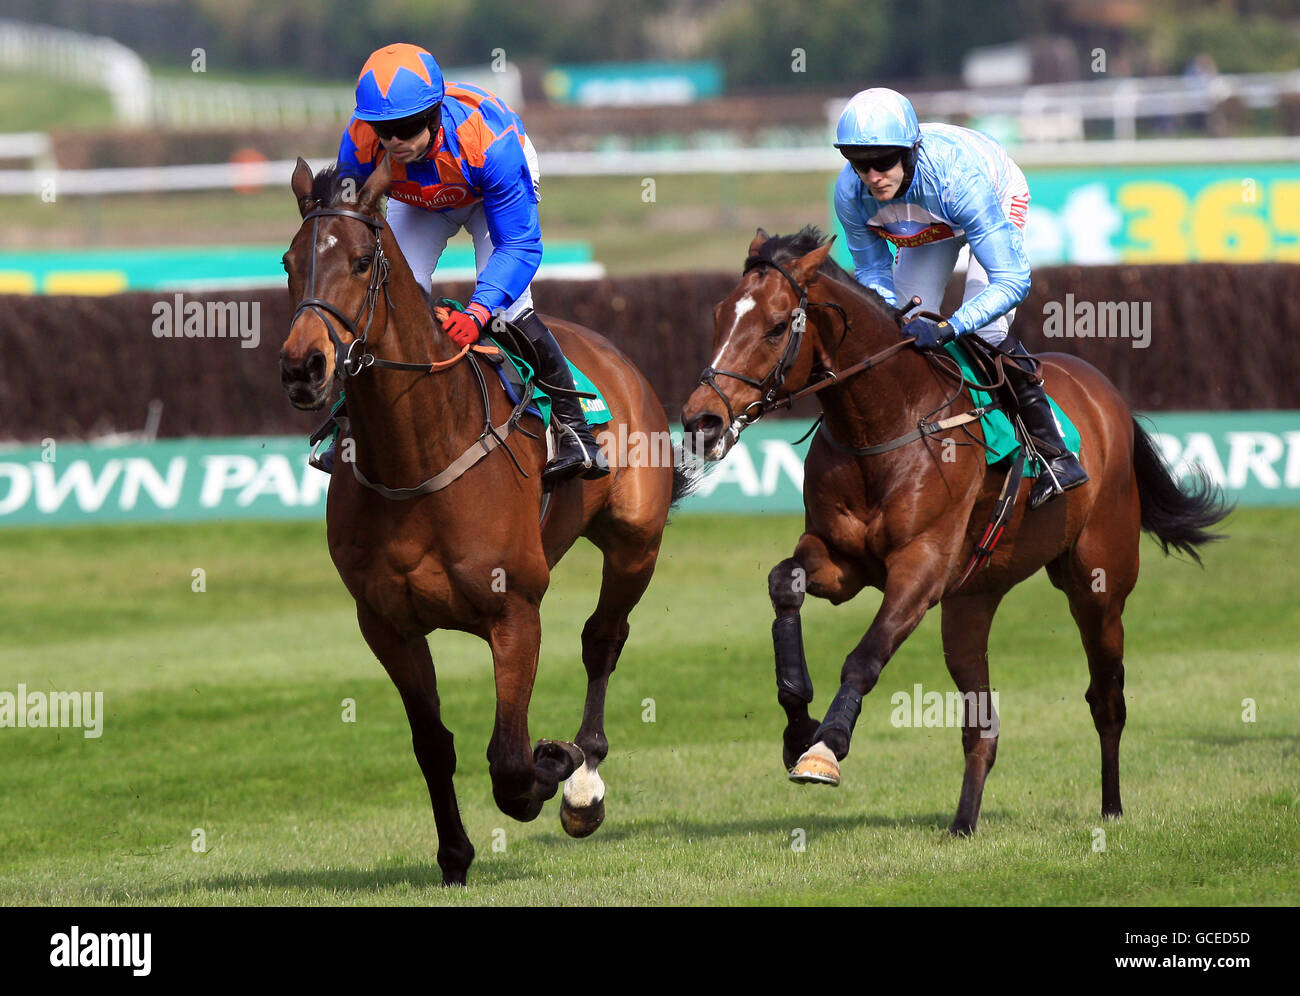 Twist Magic (left) ridden by jockey Sam Thomas leads from I'm So Lucky ridden by jockey Tom Scudamore during The bet365.com Celebration Steeple Chase Stock Photo